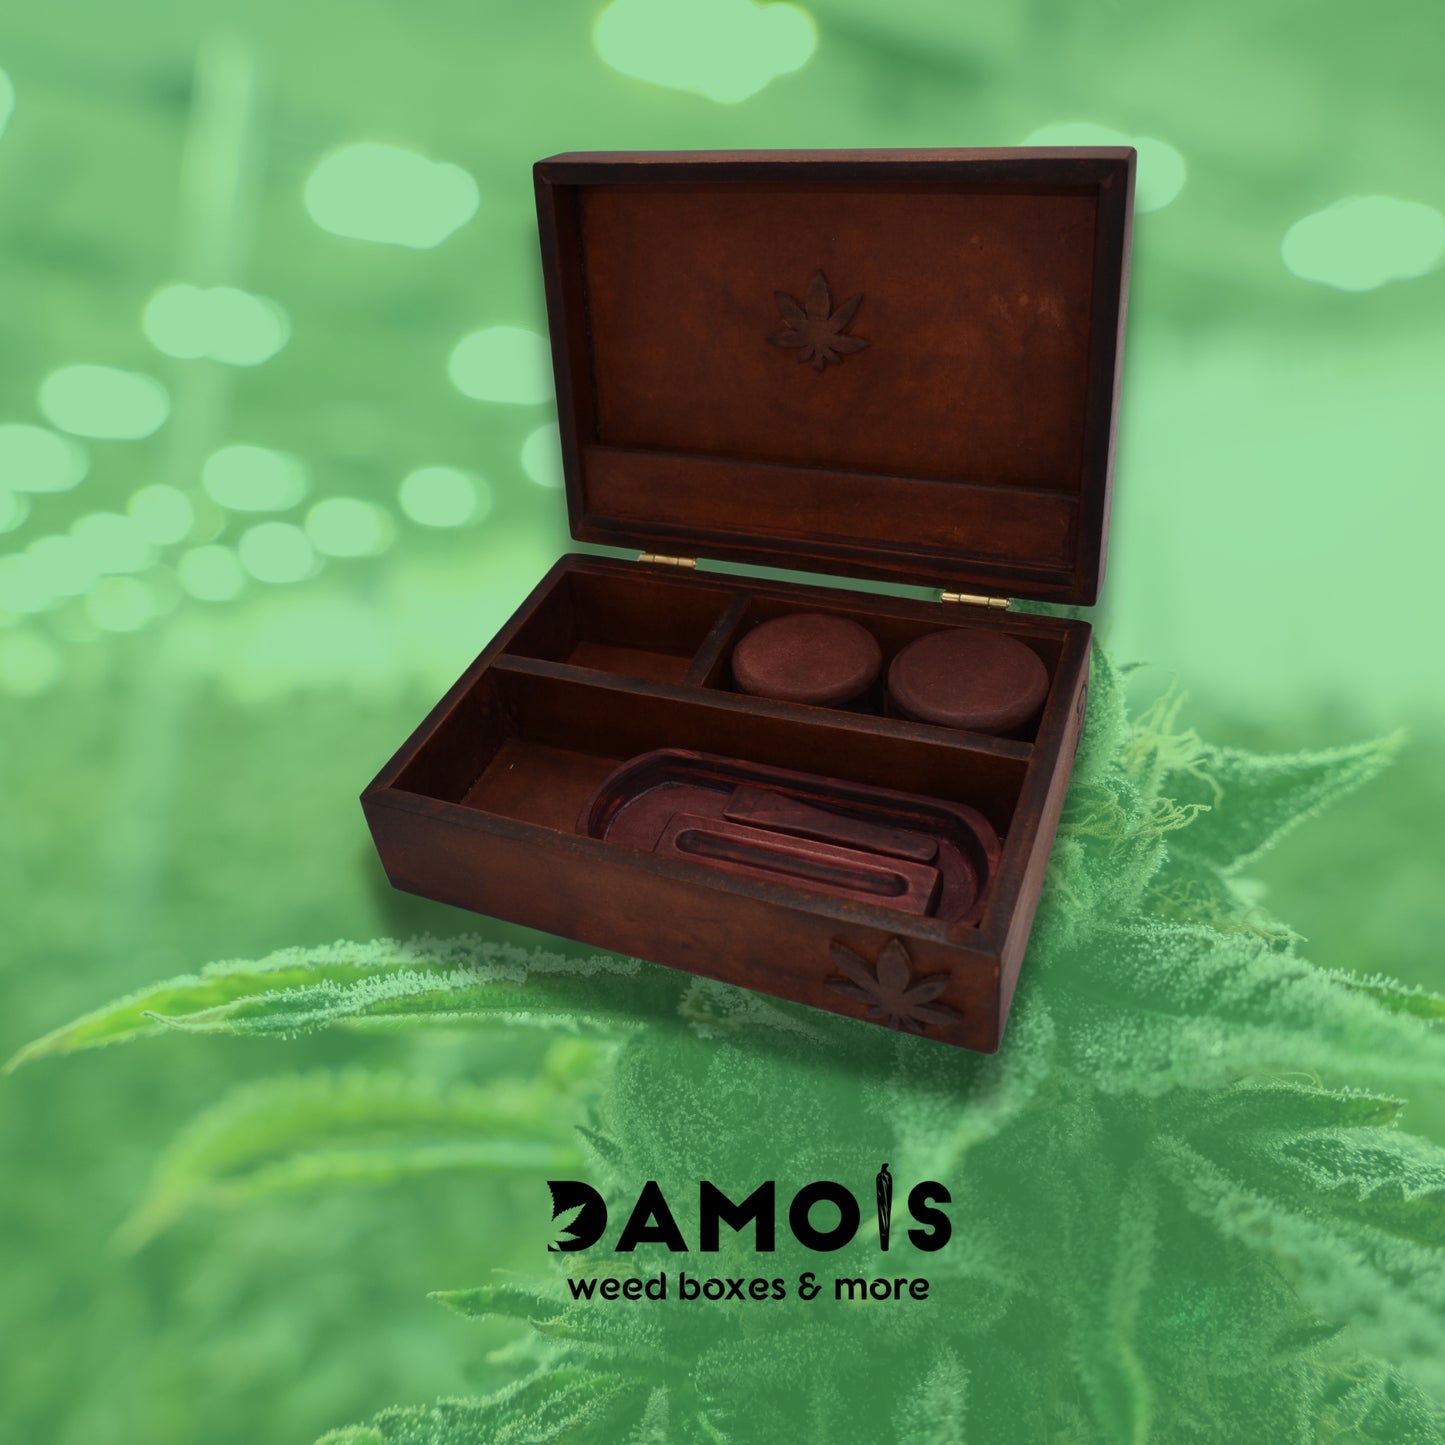 "Into the woods" Bob style weed box